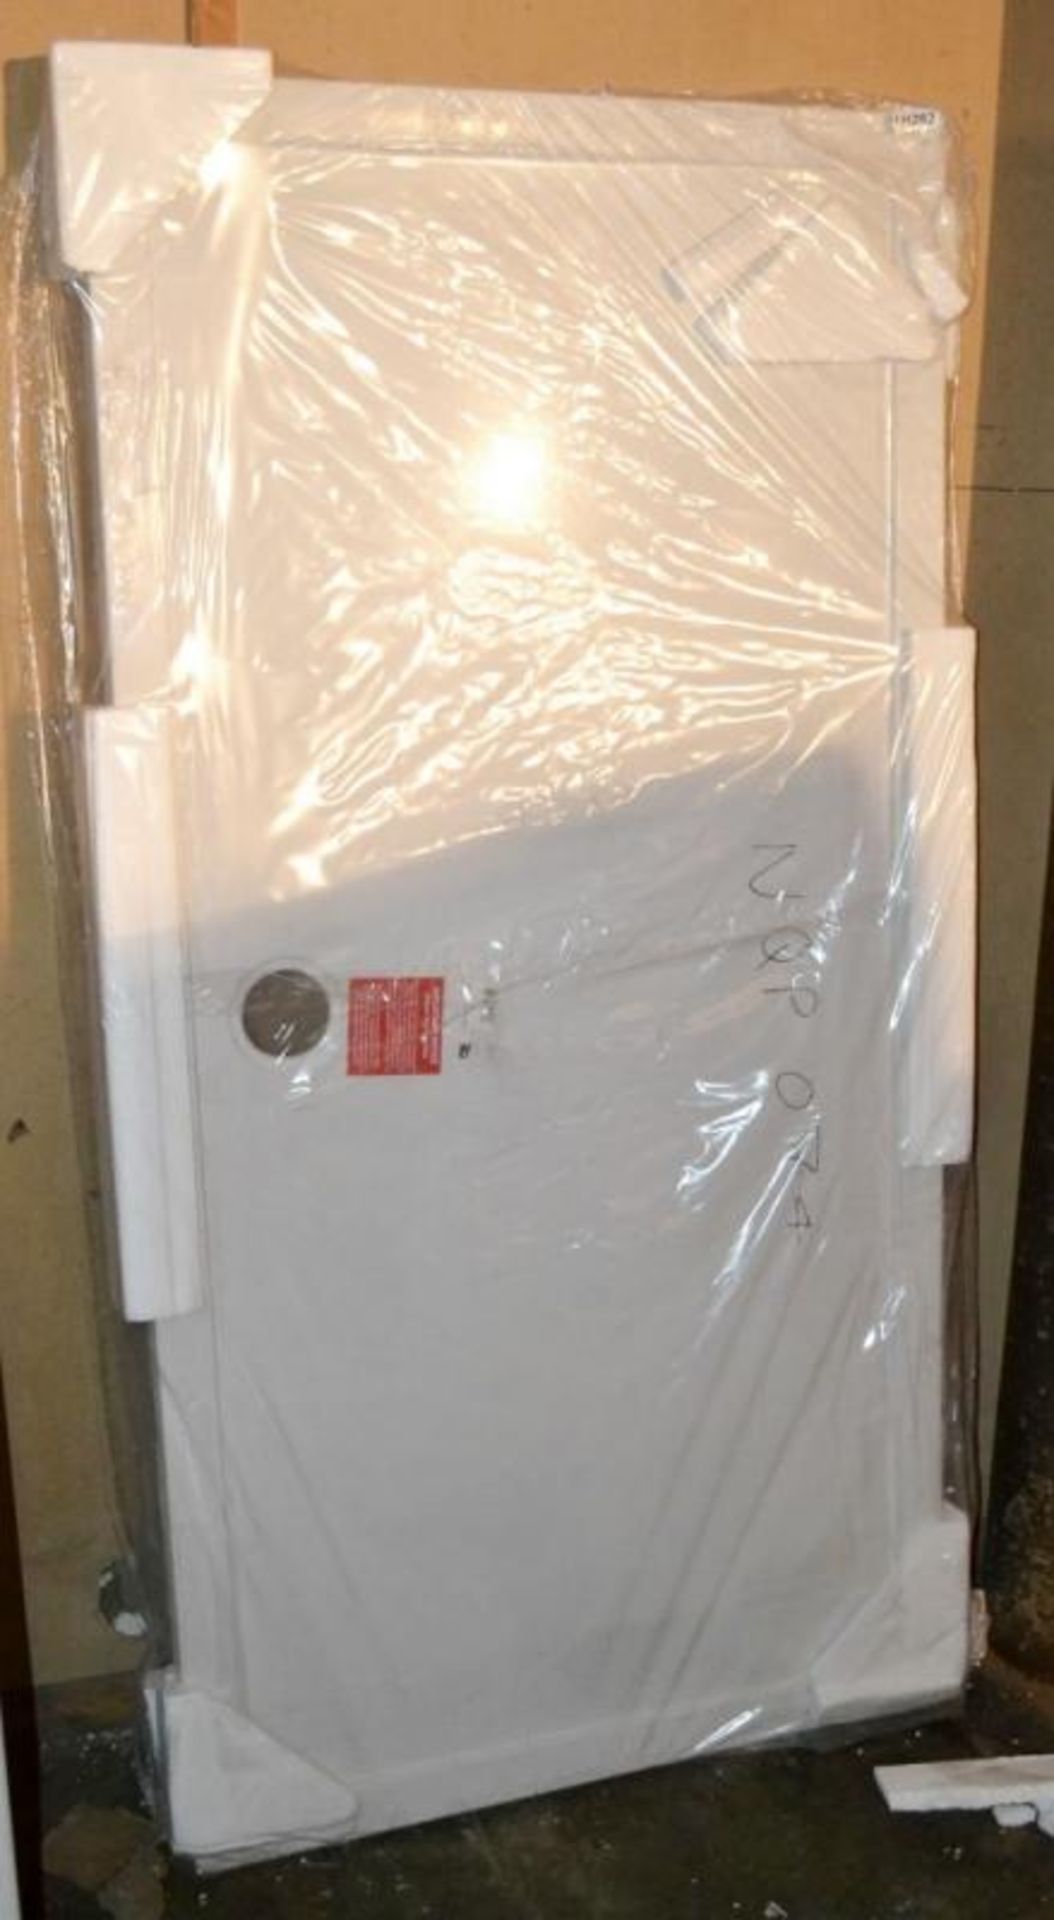 1 x Orchard Rectangular Slimline Stone Shower Tray (TR74) - New / Unused Stock - Dimensions: 1800 x - Image 5 of 5